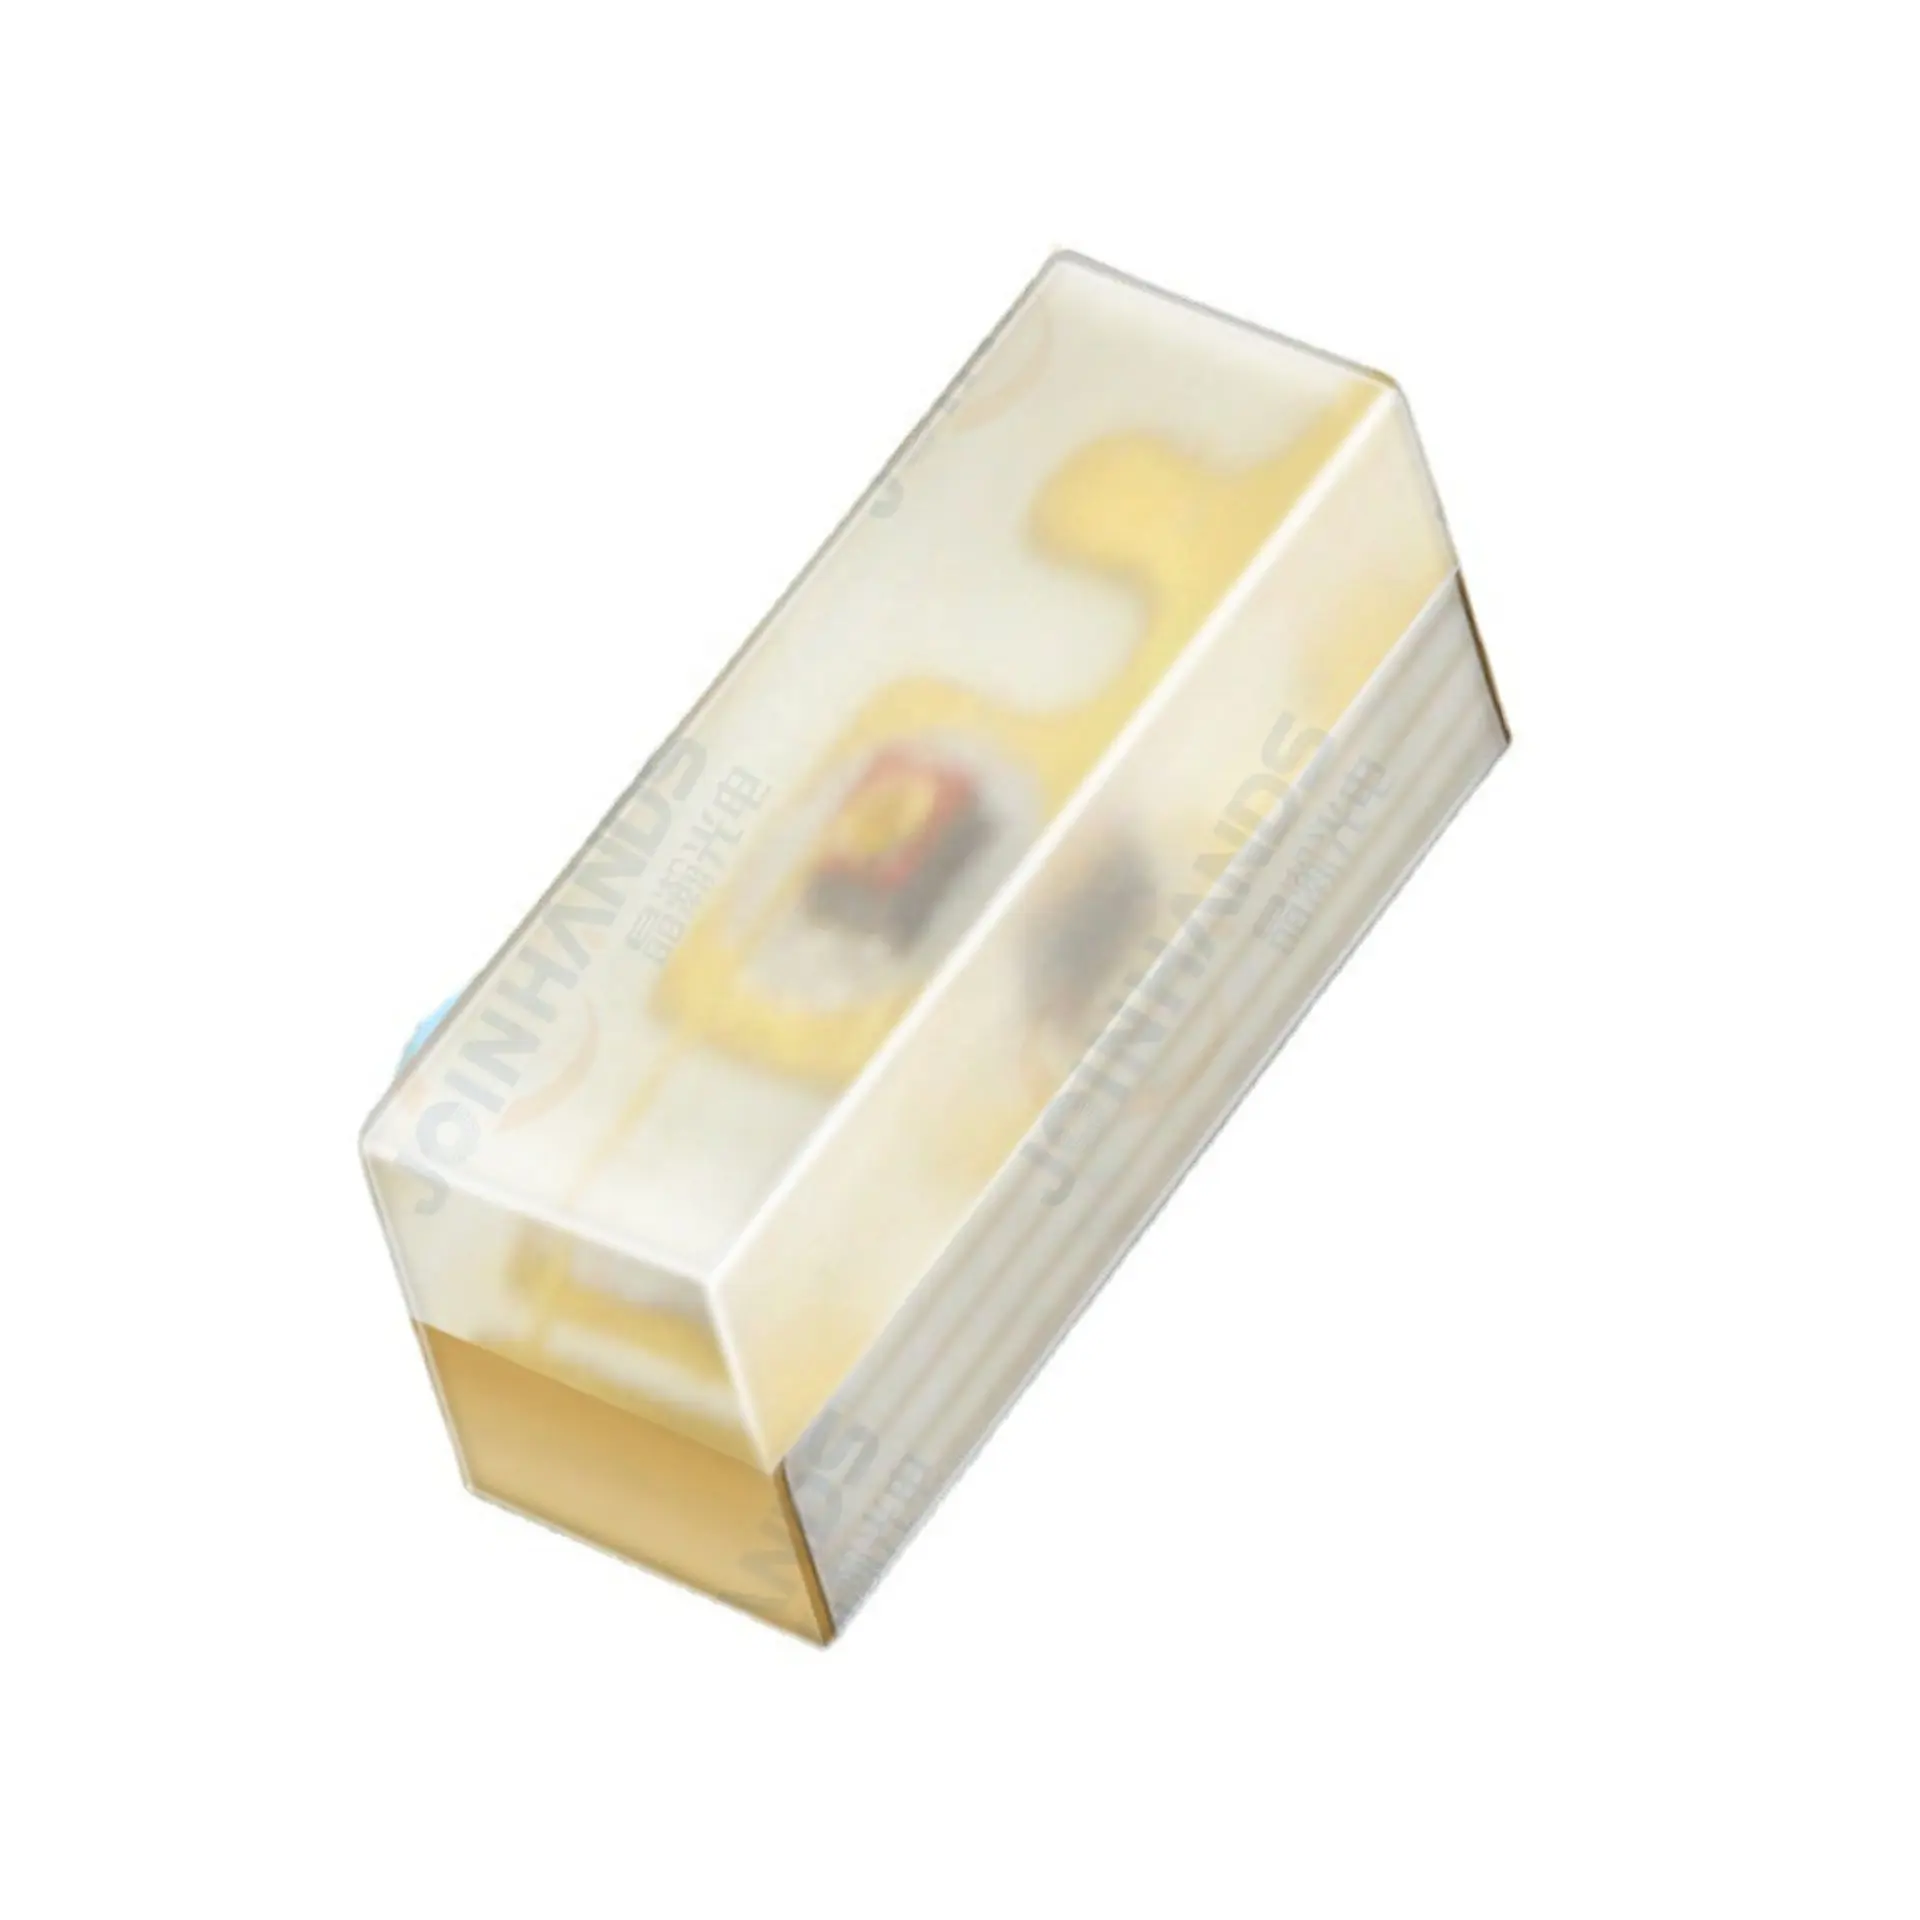 JOMHYM Cool White Small Size Micro Mini 0201 SMD LED For Indication